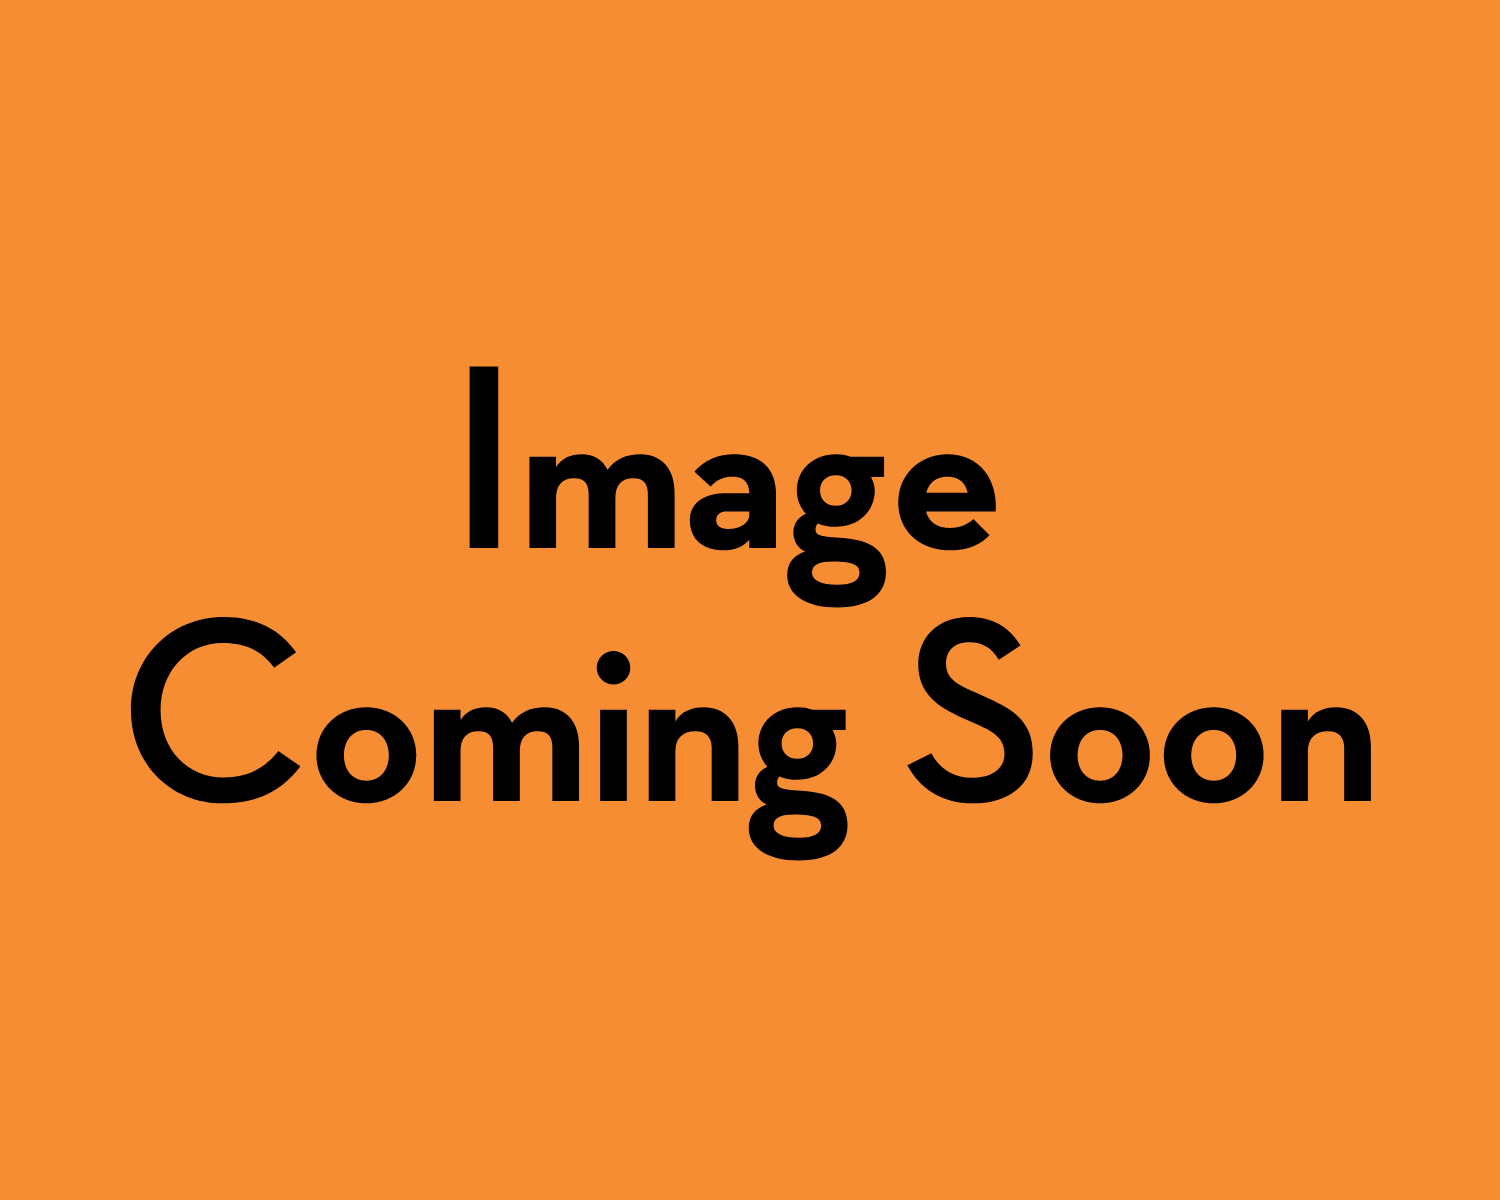 An orange square with black text that reads Image Coming Soon